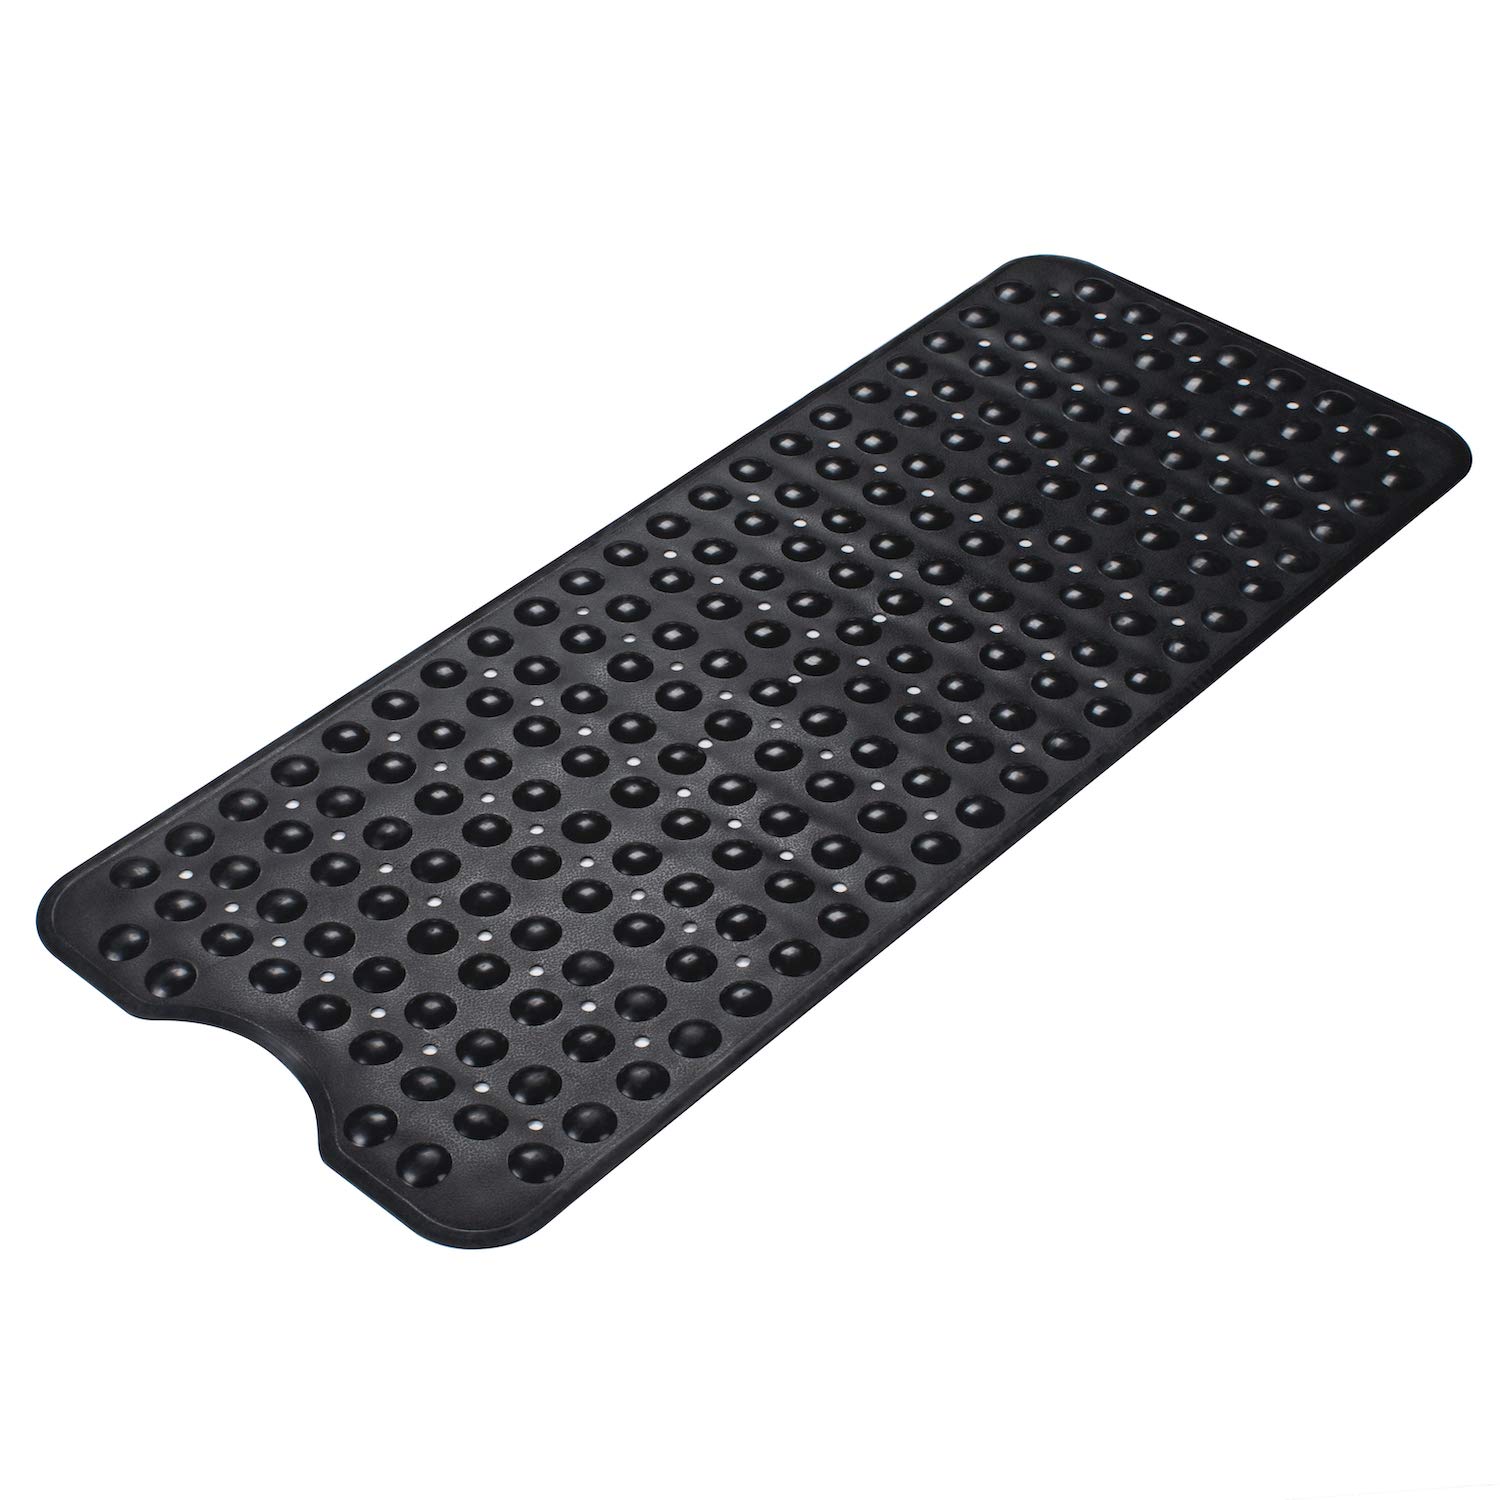 Book Cover AmazerBath Bath Tub Mat, Larger Suction Cups Bath Mats with Strong Grip, Safe TPE Material, Machine Washable, Non-Slip Shower Mats for Bathroom, 39 x 16 Inches (Black)